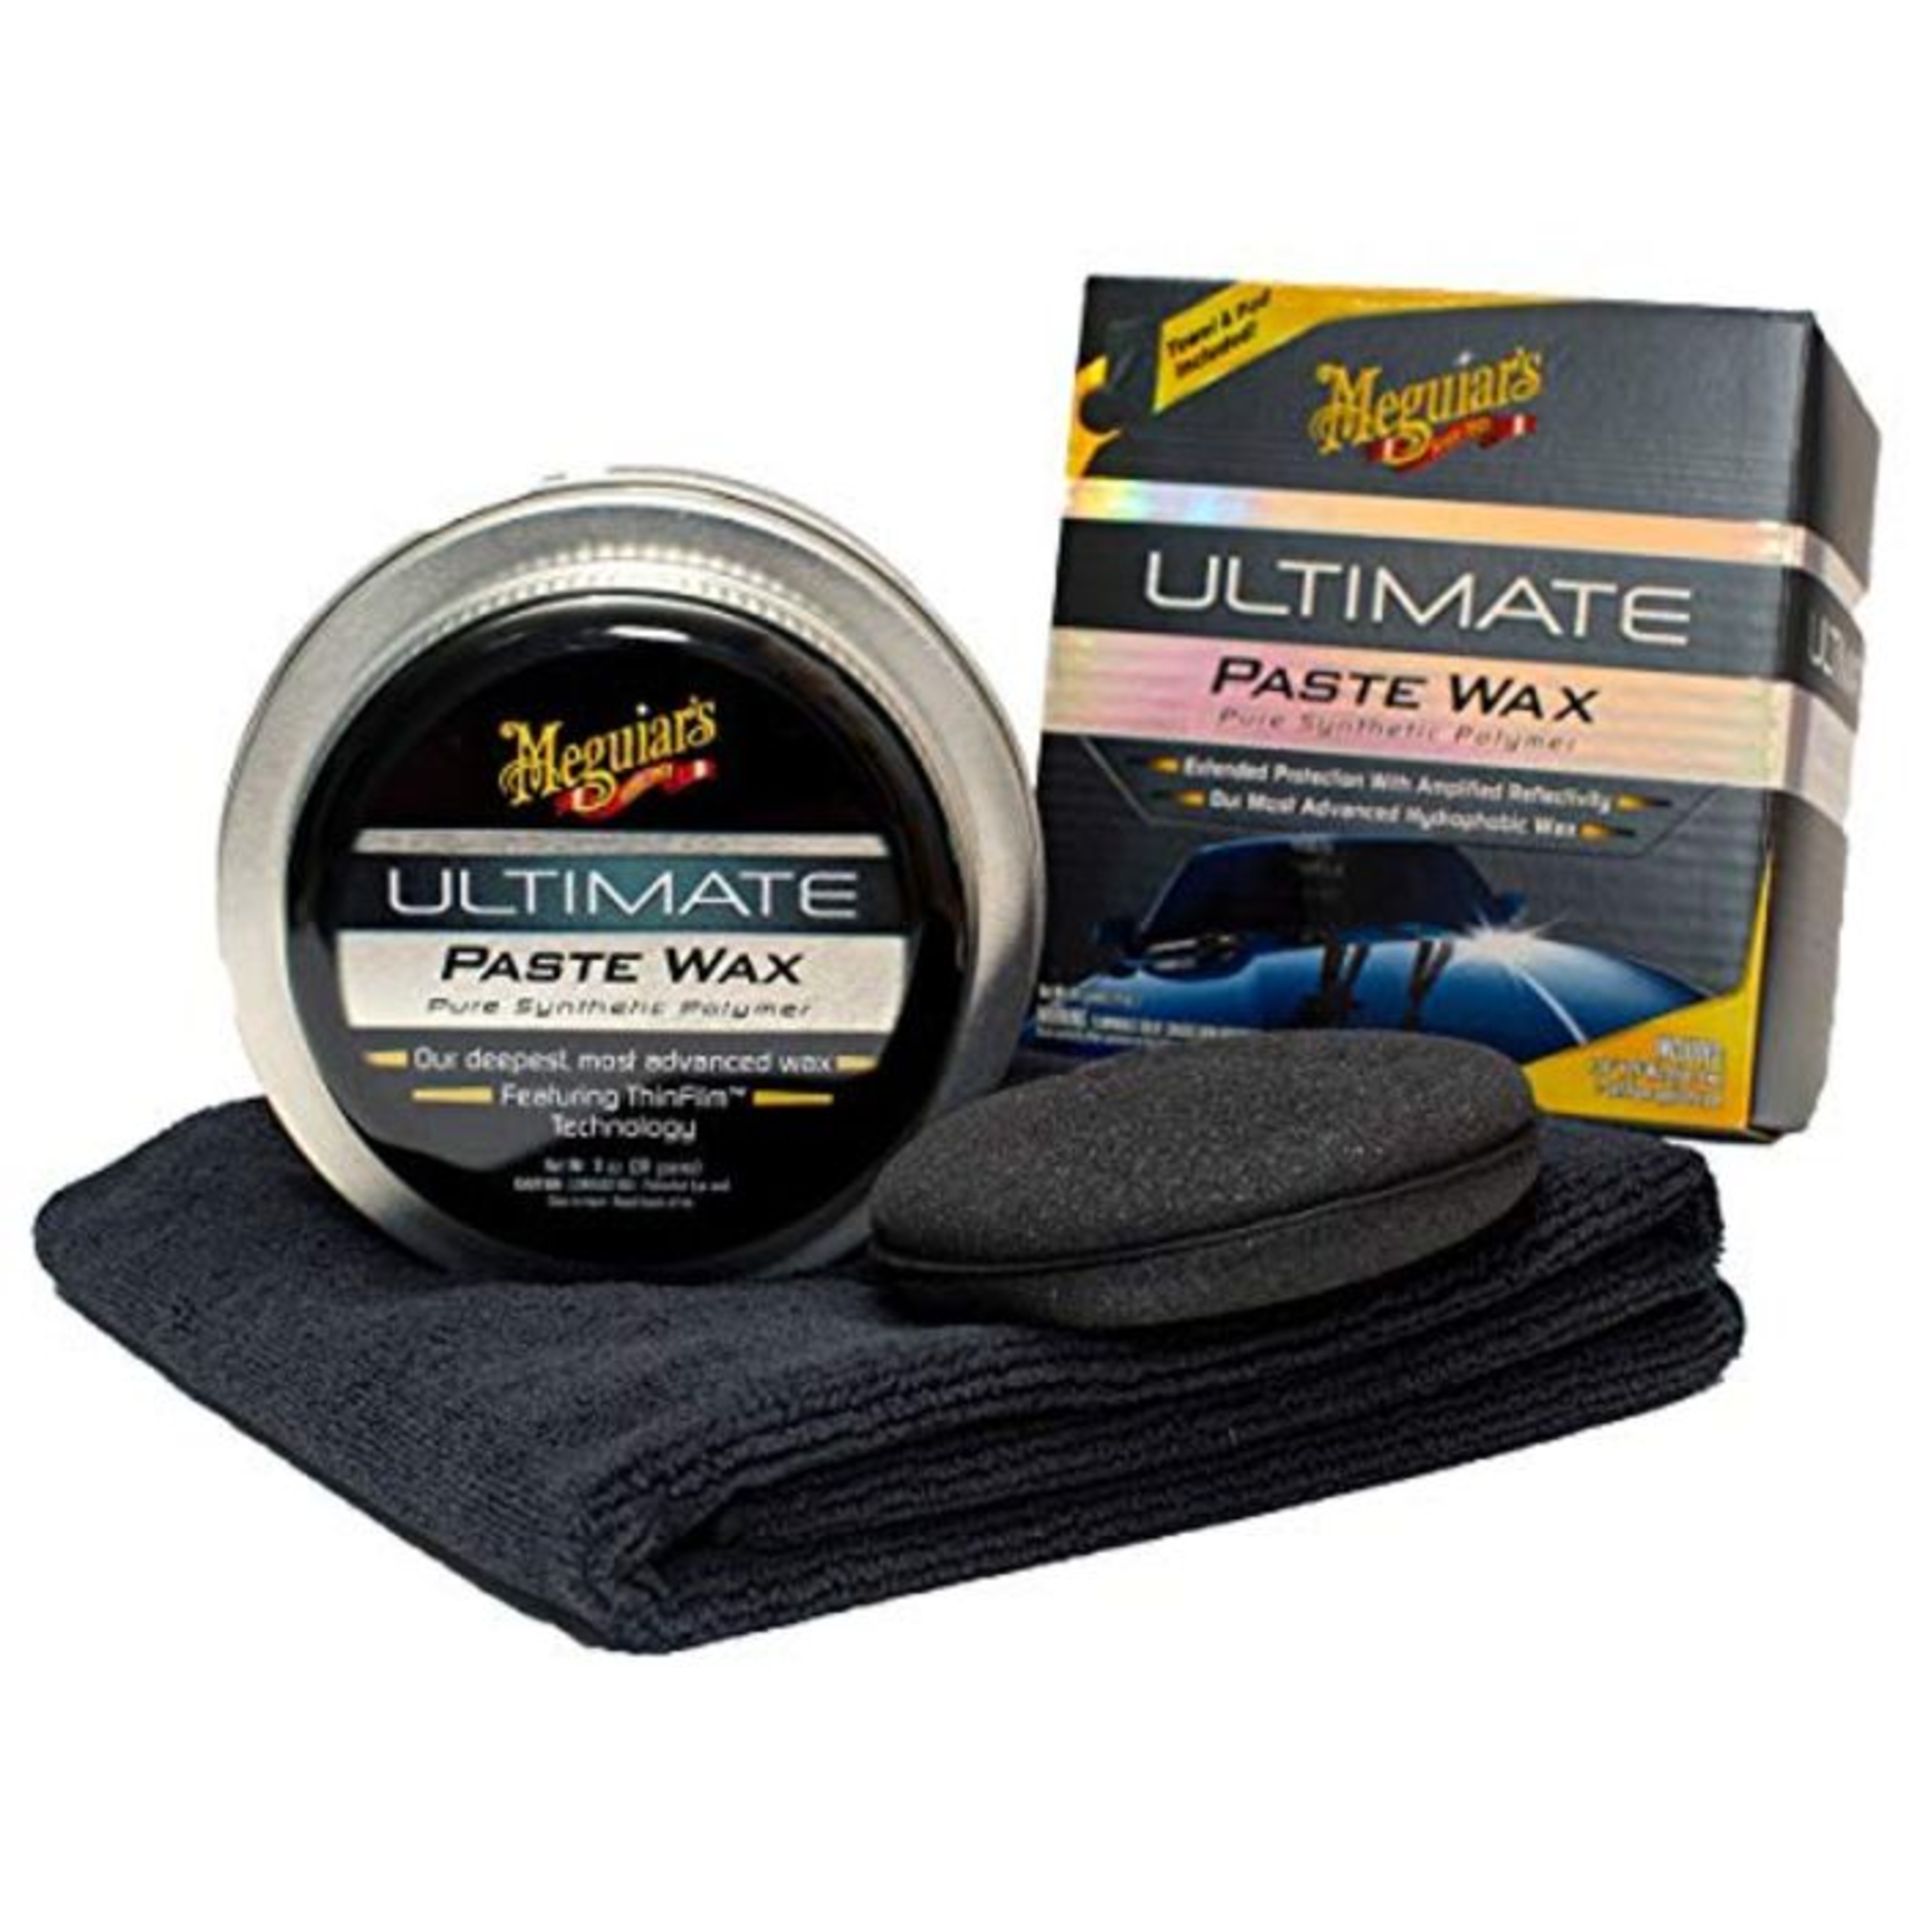 Meguiar's G18211 Ultimate Paste Car Wax 311g Pure Synthetic Polymer Car Wax